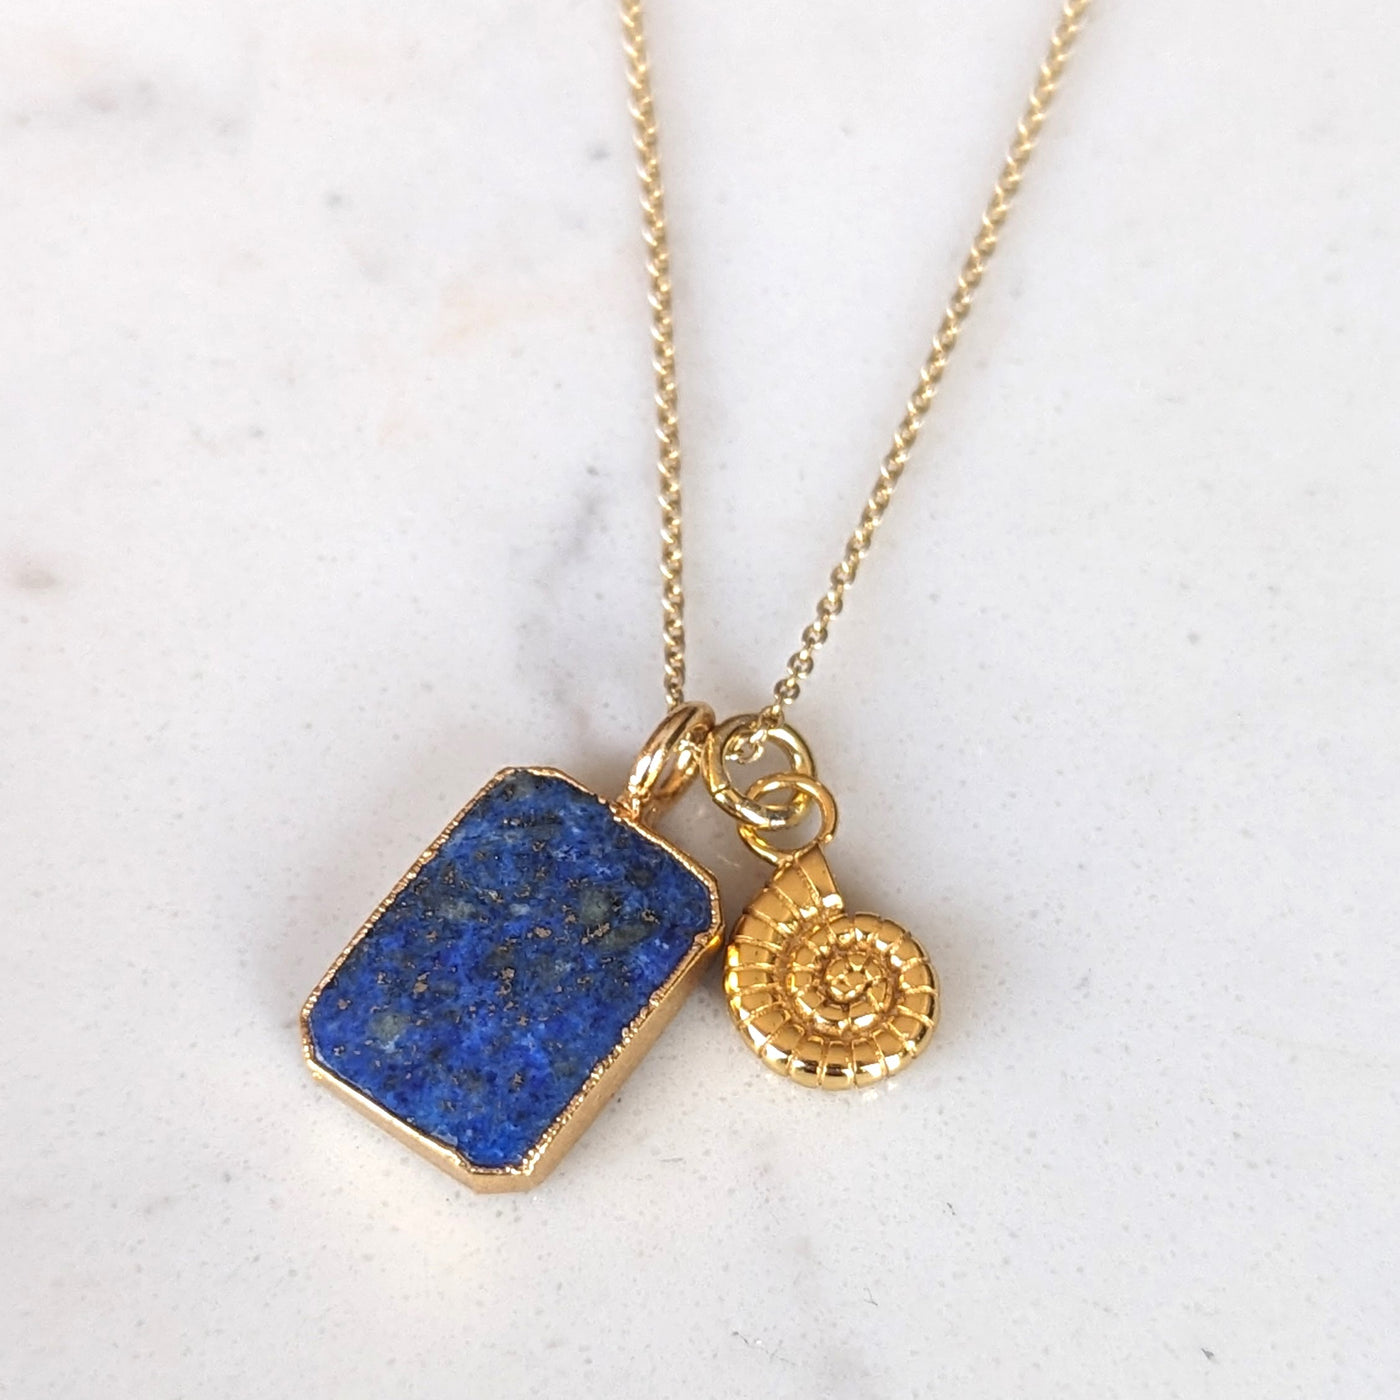 The Duo Lapis Lazuli Necklace - 18ct Gold Plated